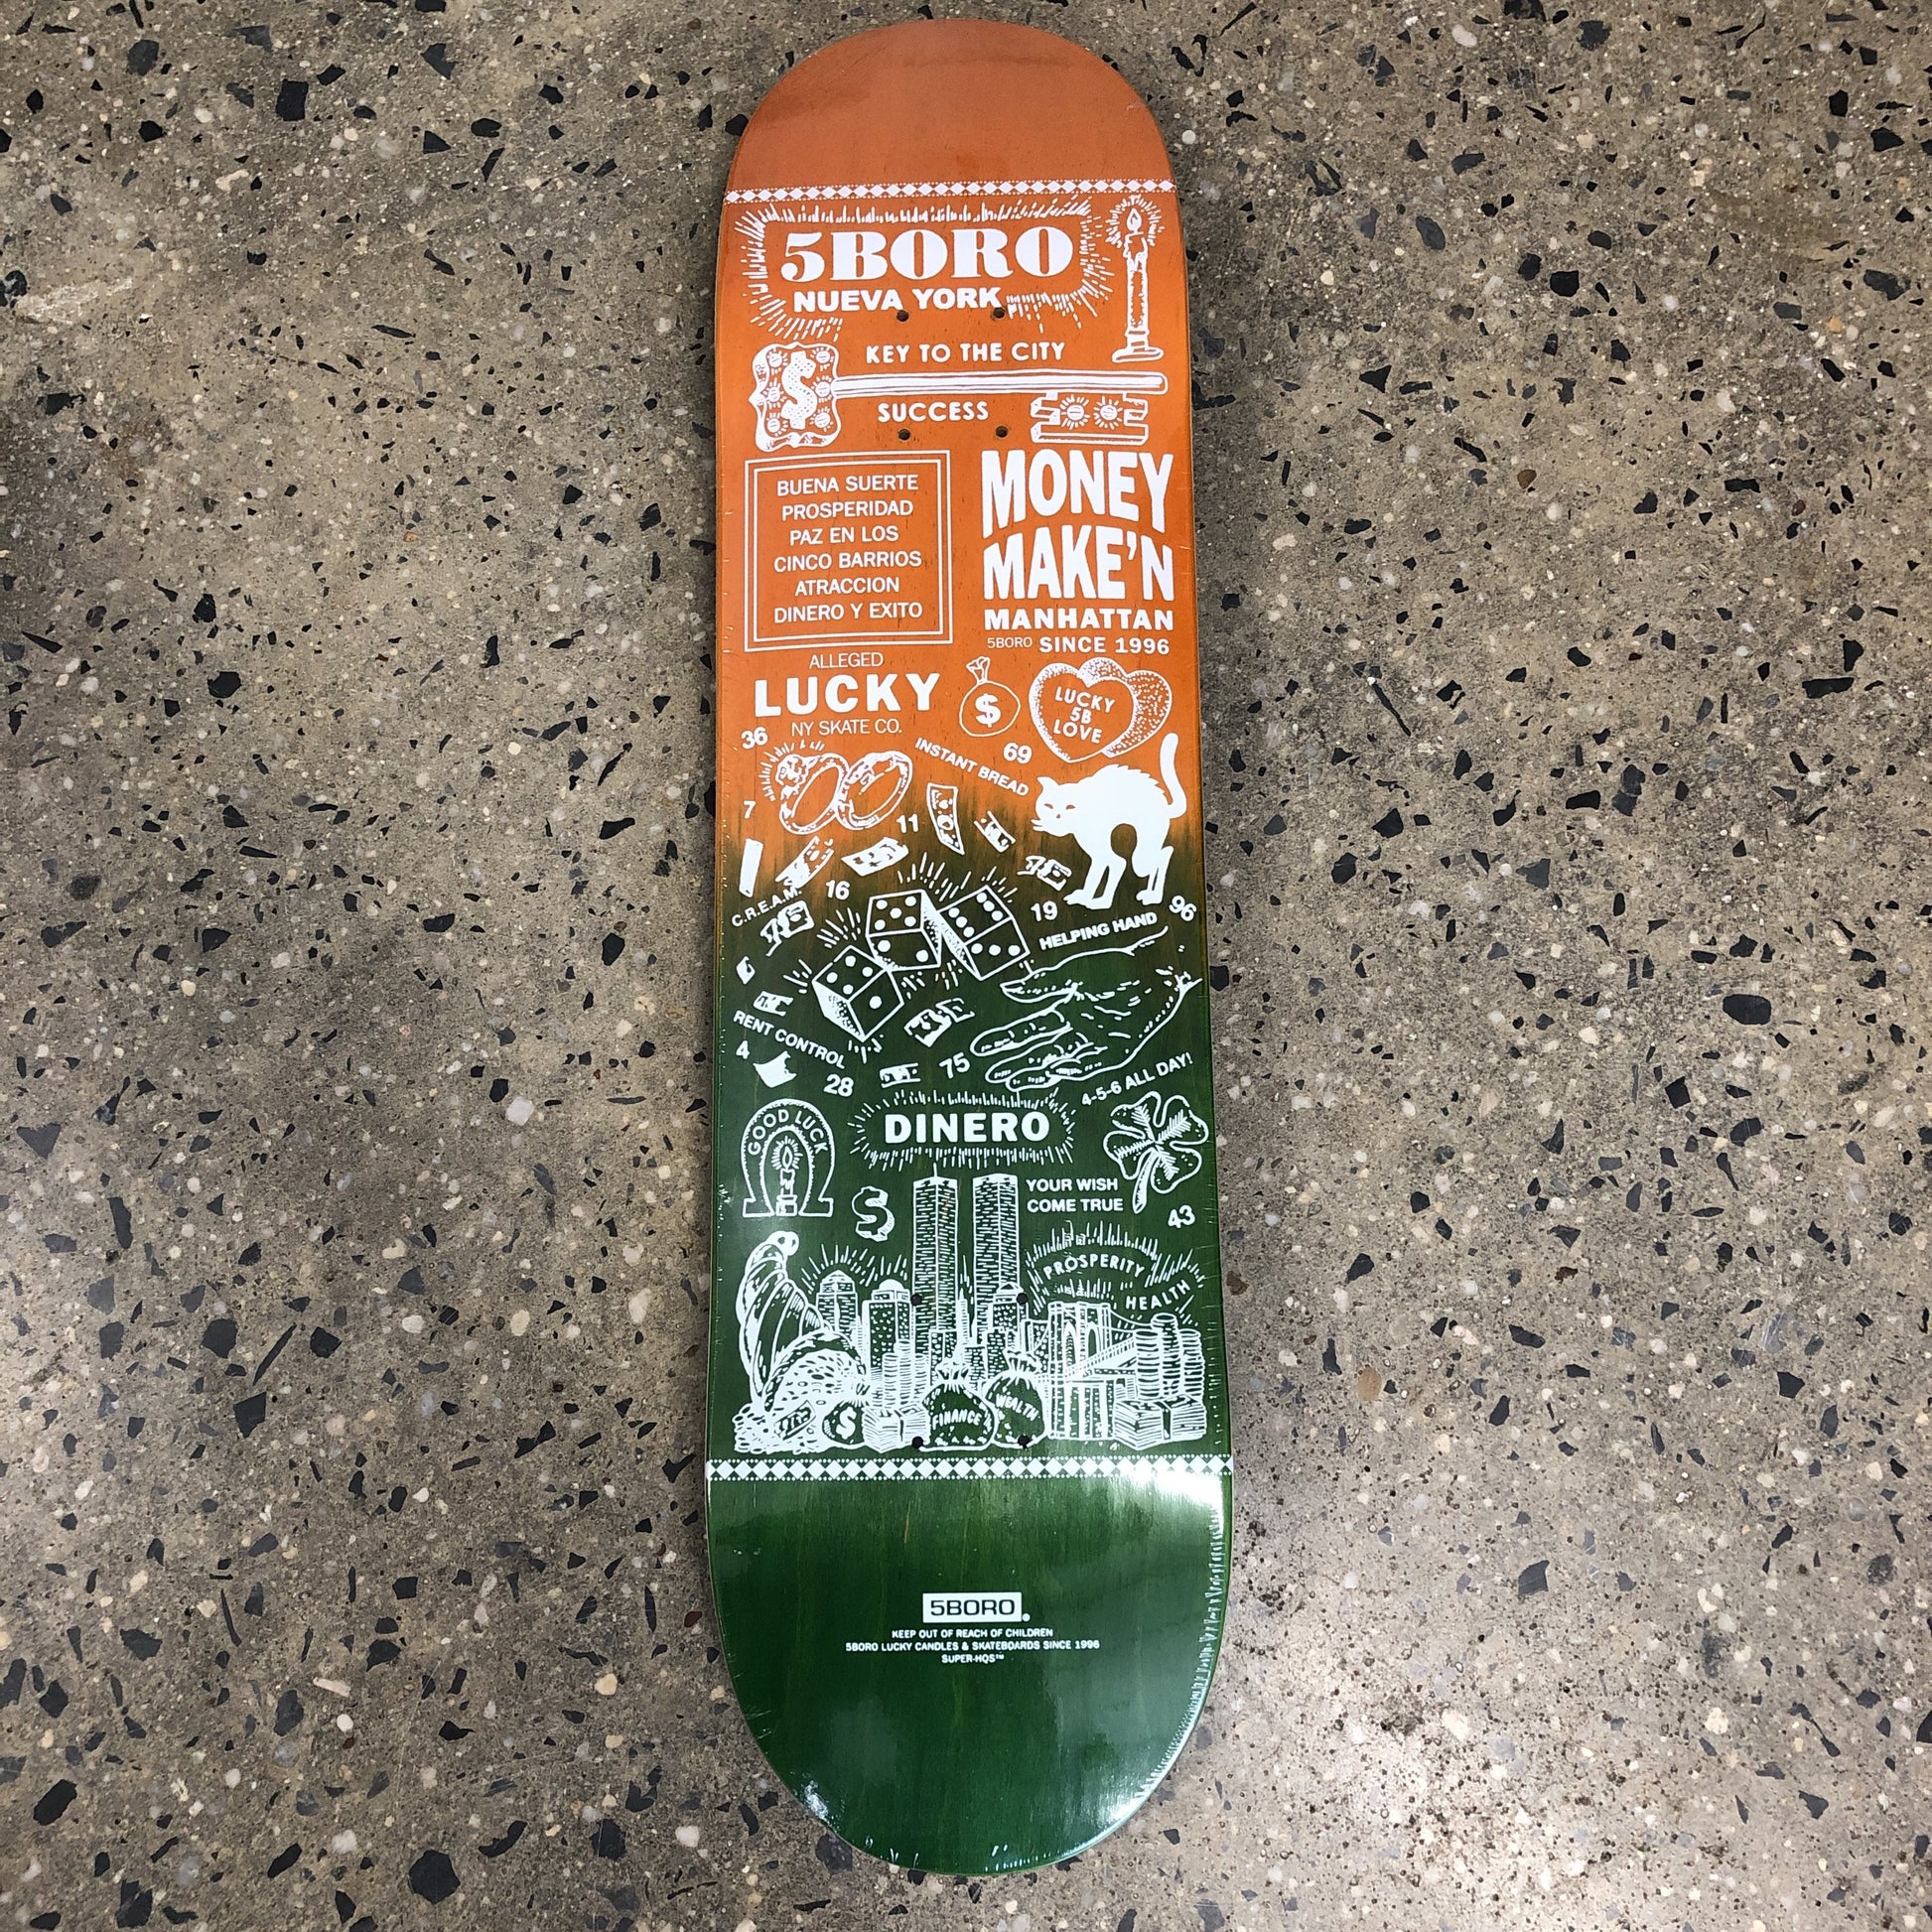 orange and green skateboard with white text and drawings